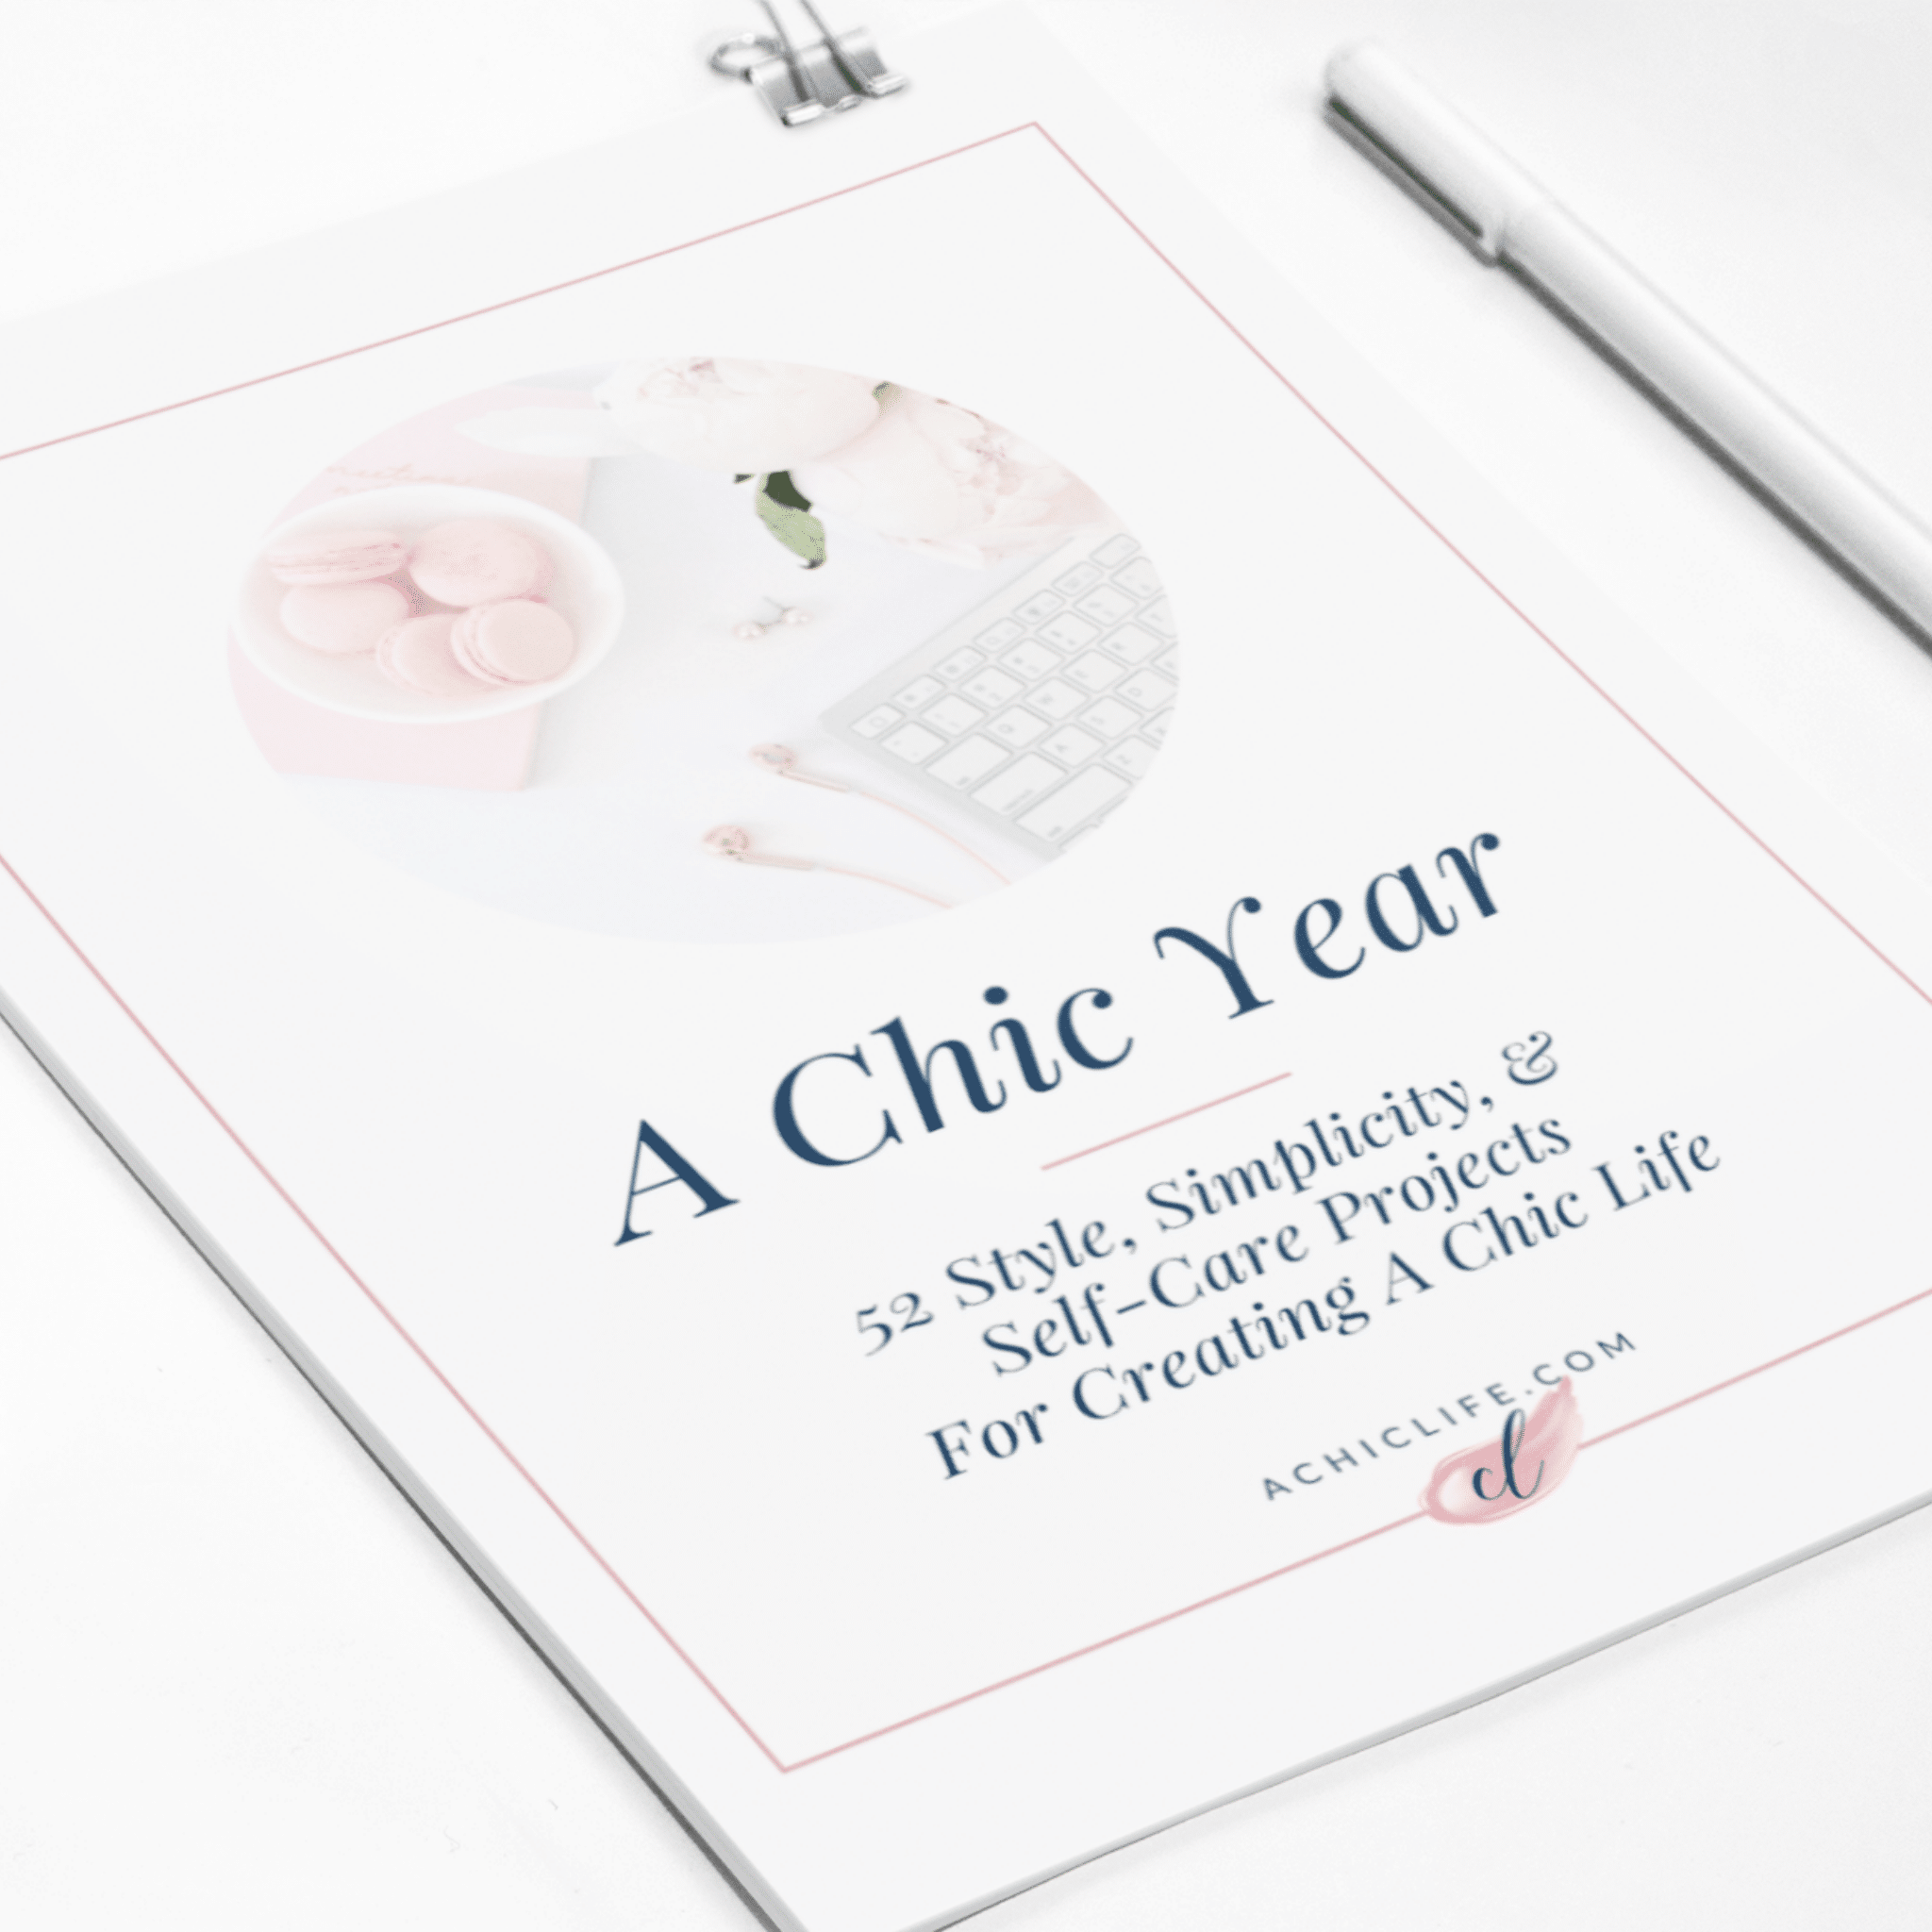 A Chic Year: 52 Style, Simplicity, & Self-Care Projects For Creating A Chic Life